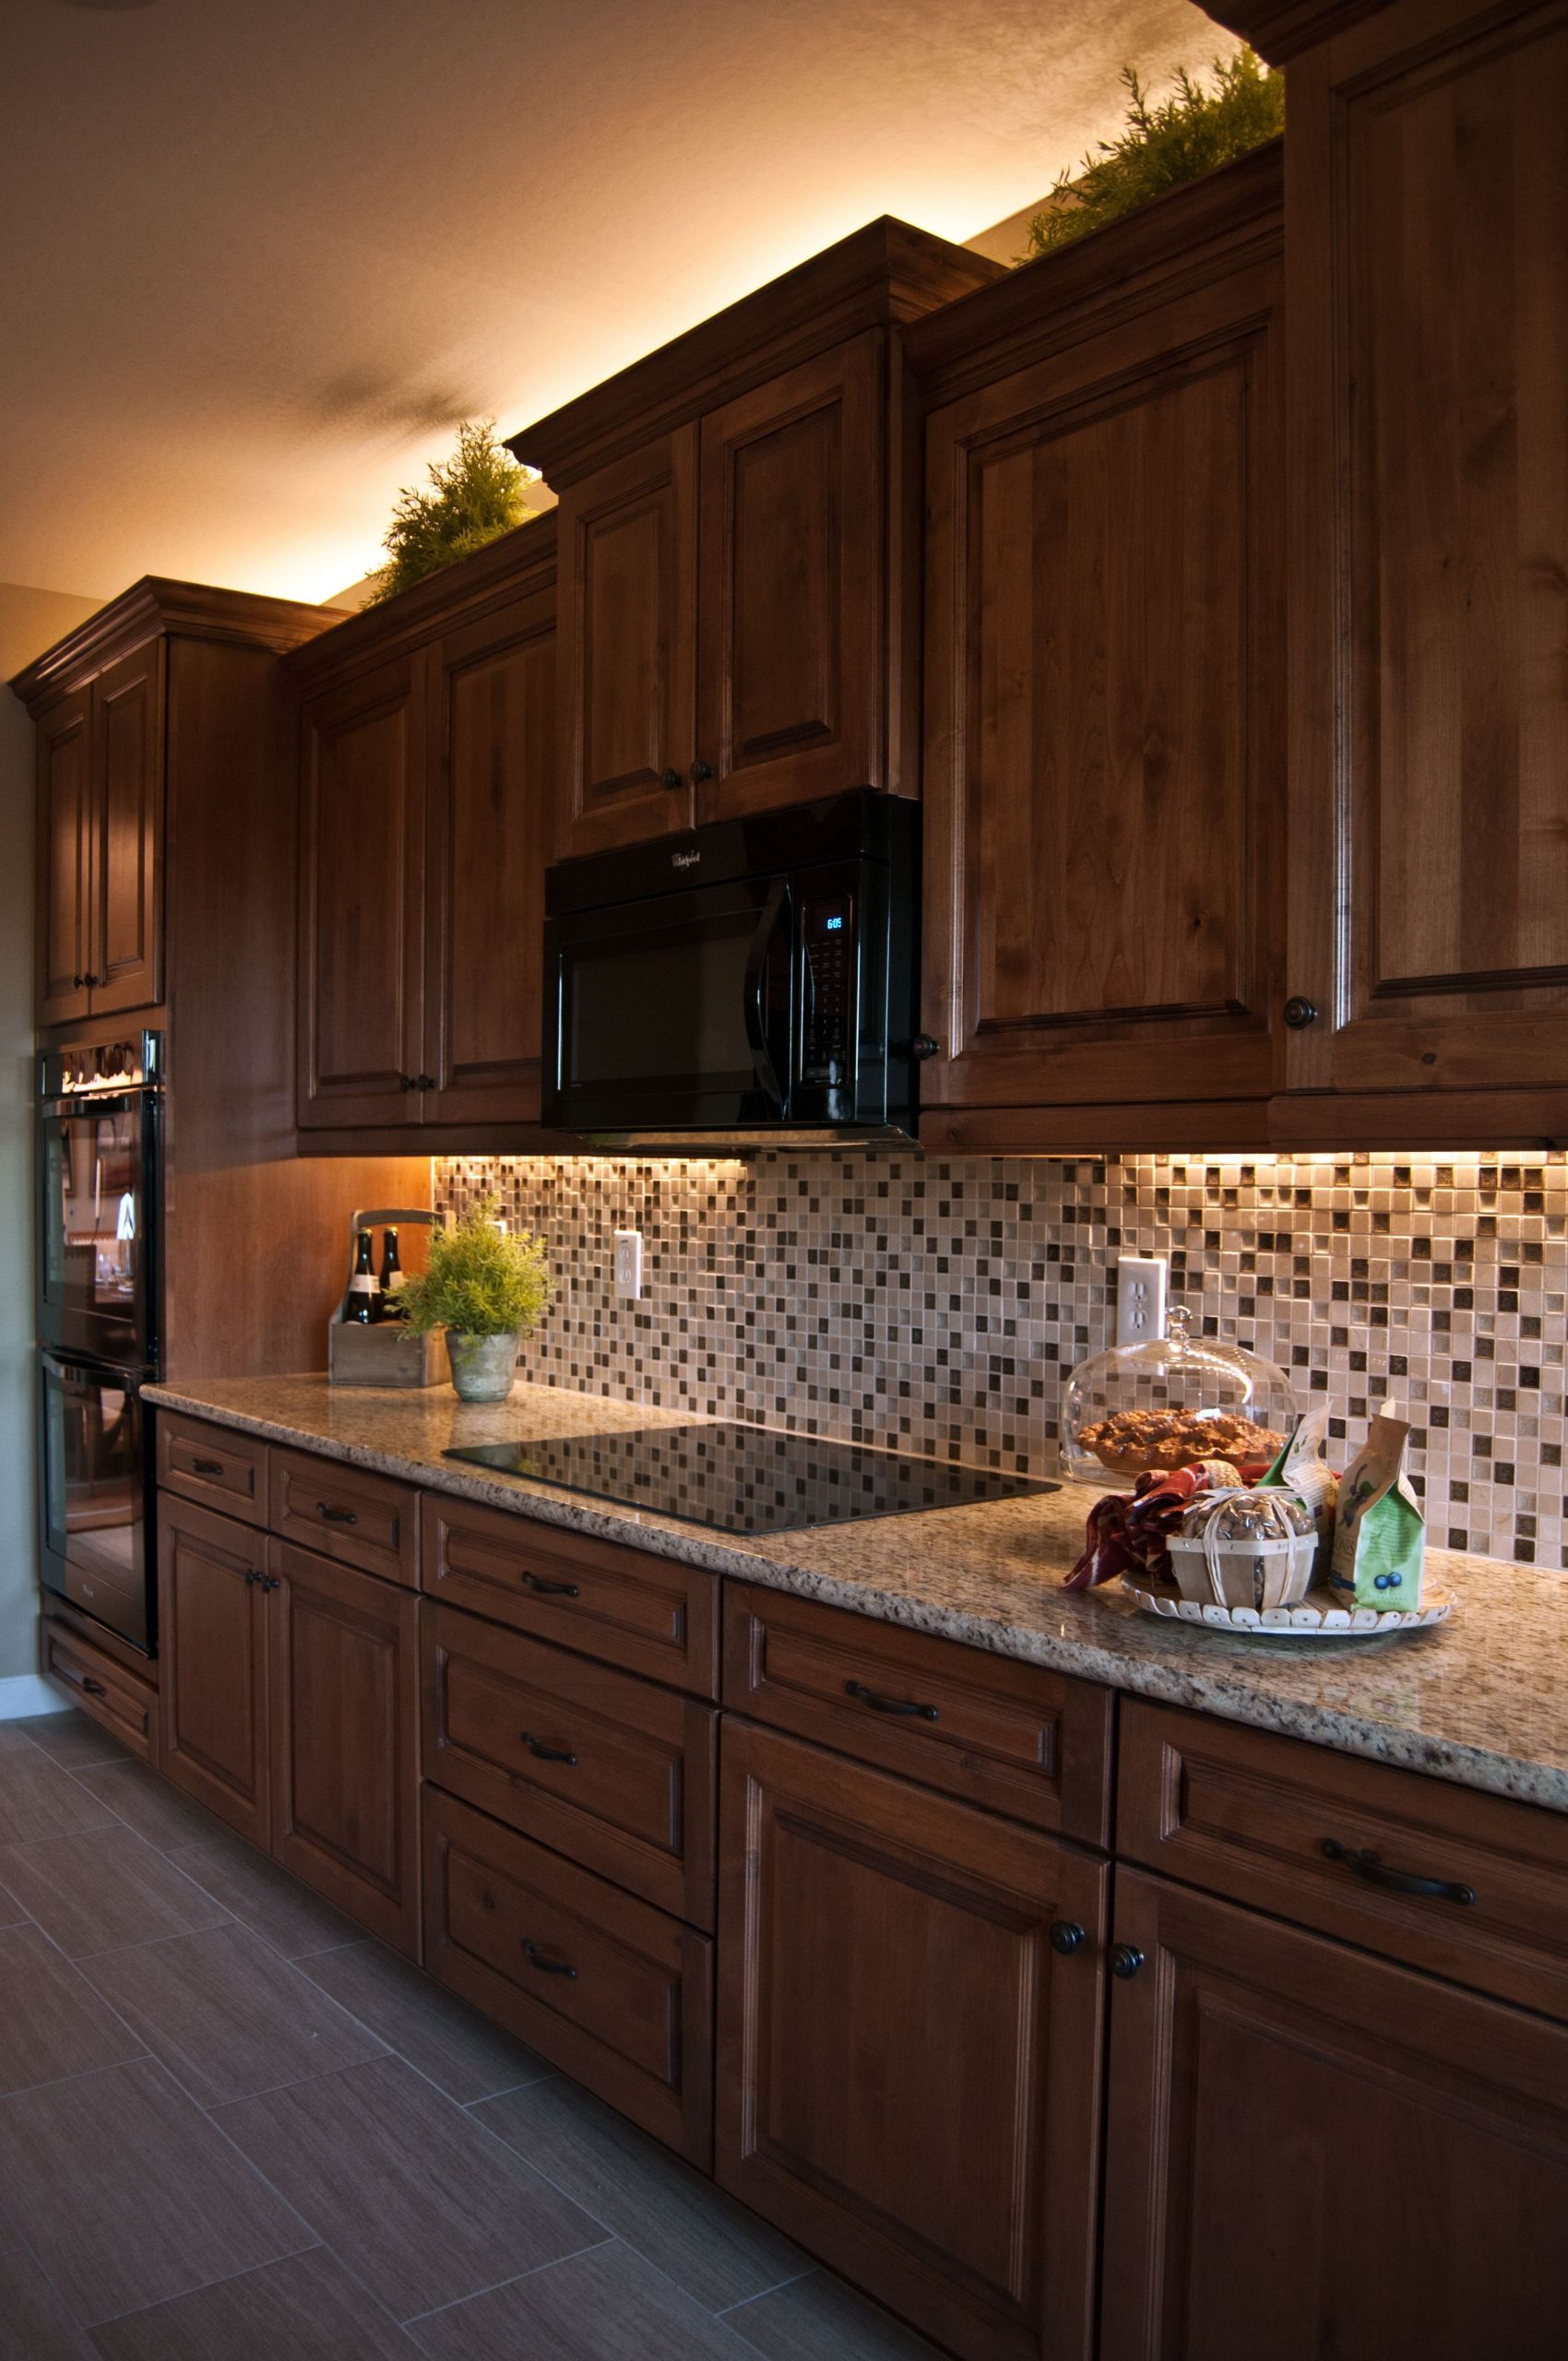 Led Lighting For Kitchen Cabinets
 Inspired LED lighting in traditional style kitchen warm